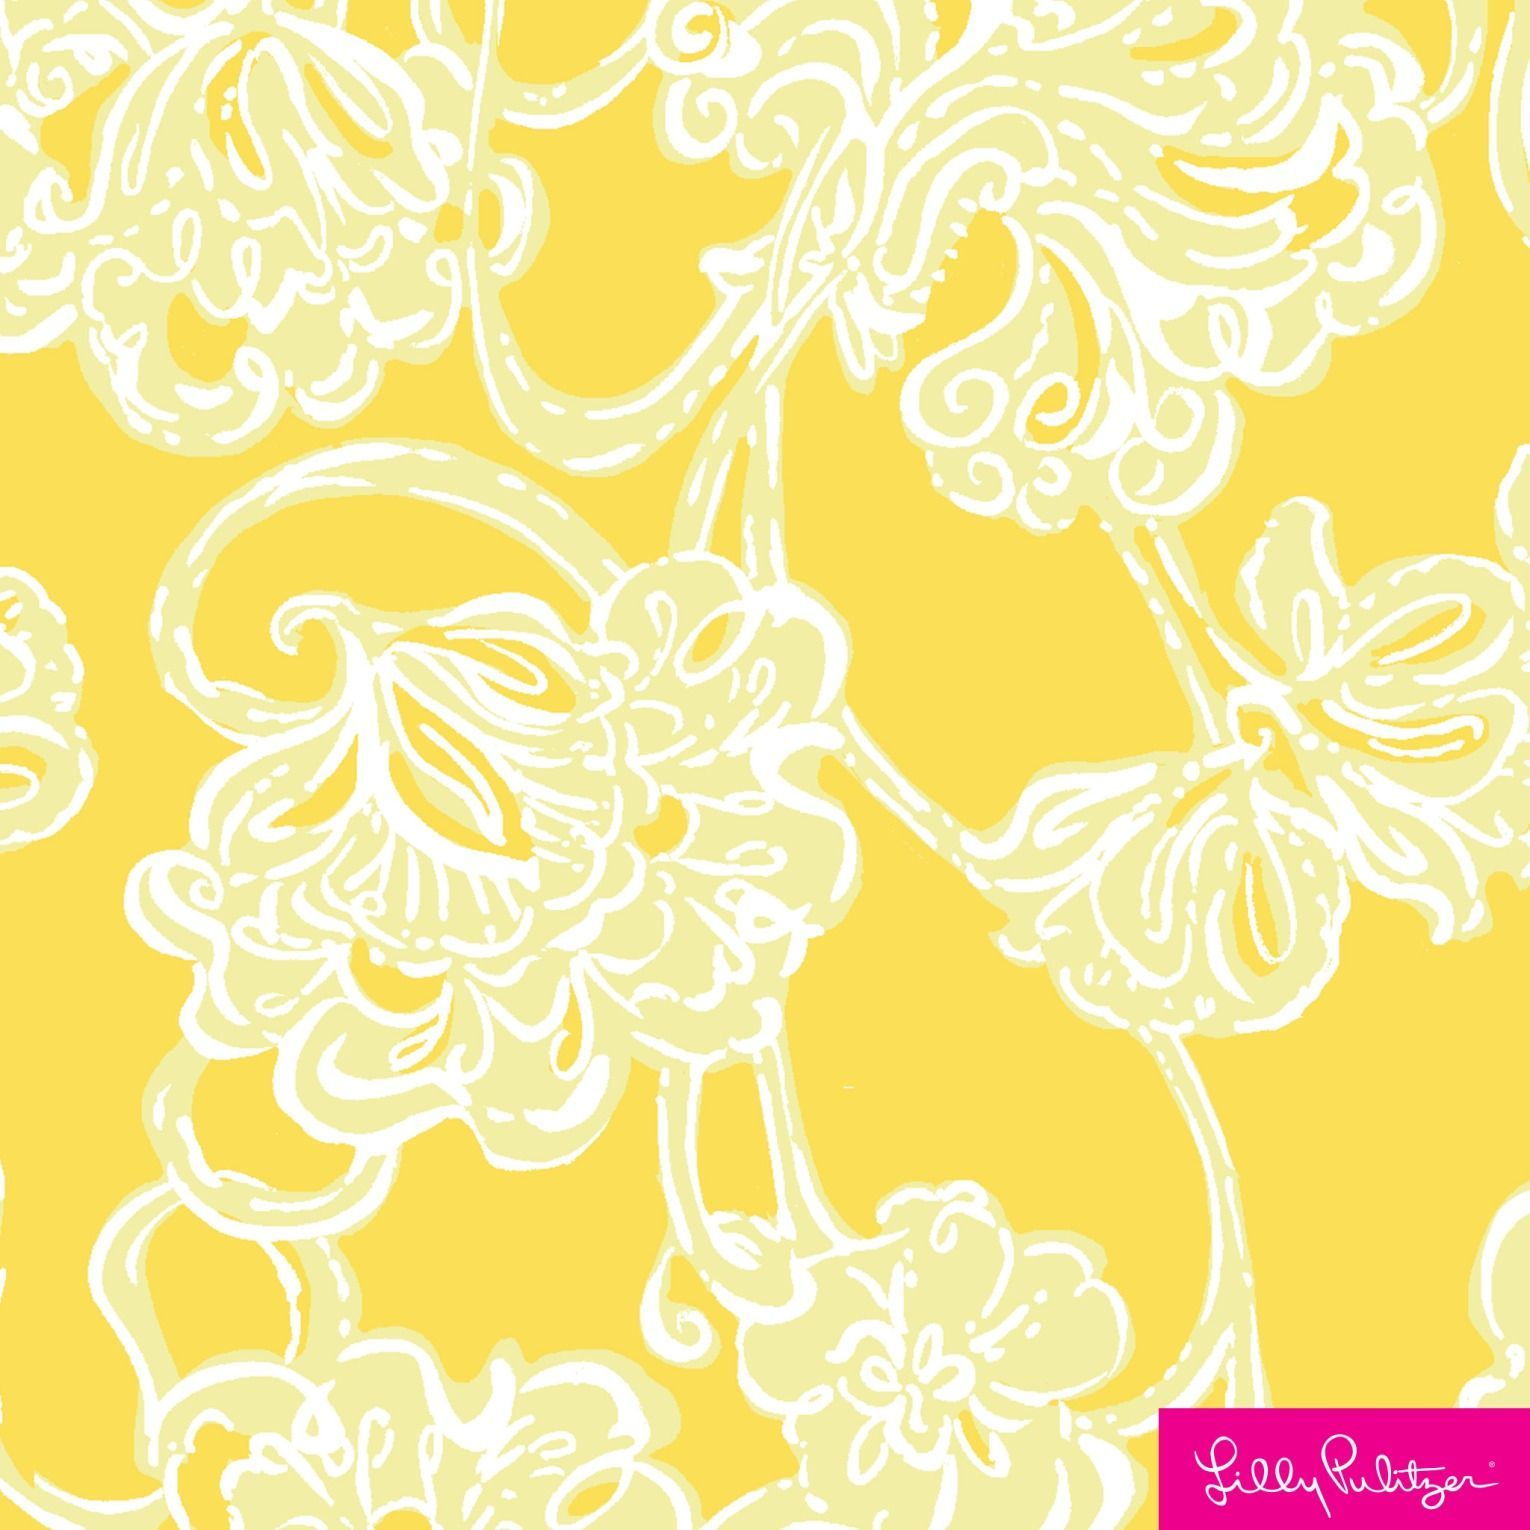 Shop Lilly Prints & Fabric Patterns. Lilly pulitzer iphone wallpaper, Lilly prints, Lilly pulitzer prints